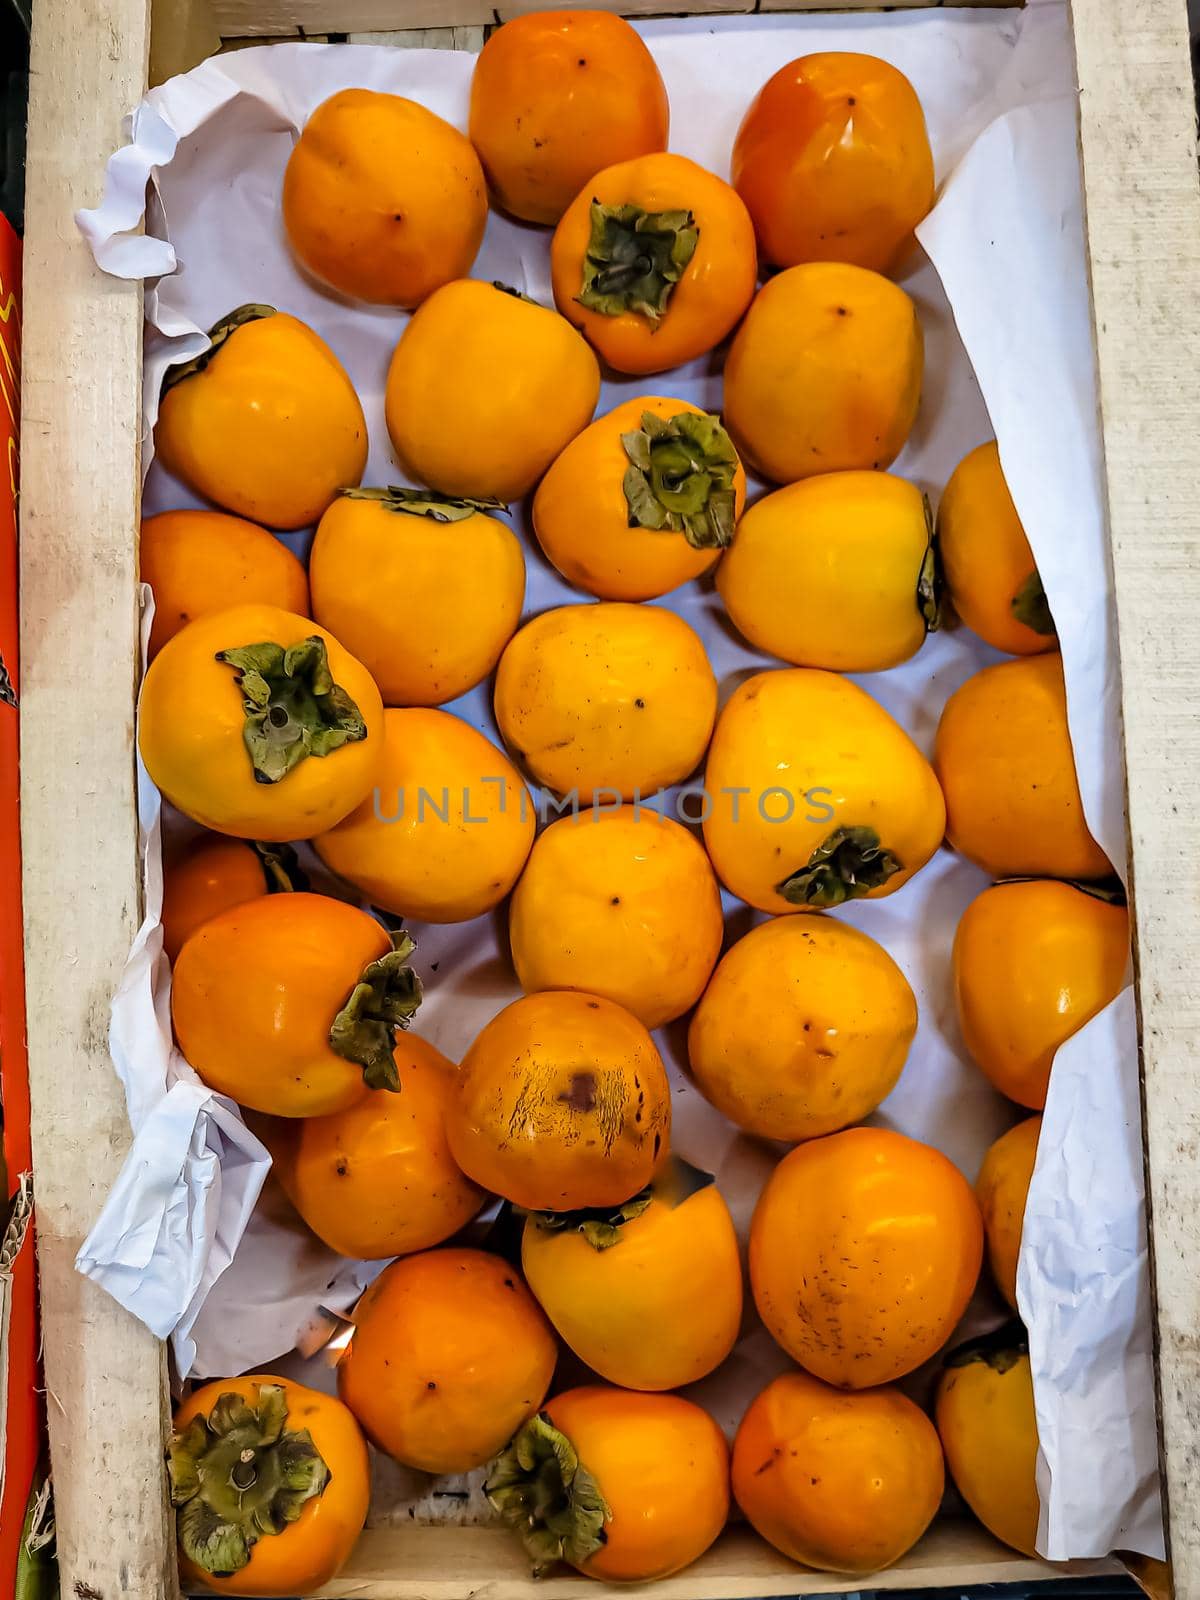 Fresh persimmon fruits are in a box in the store